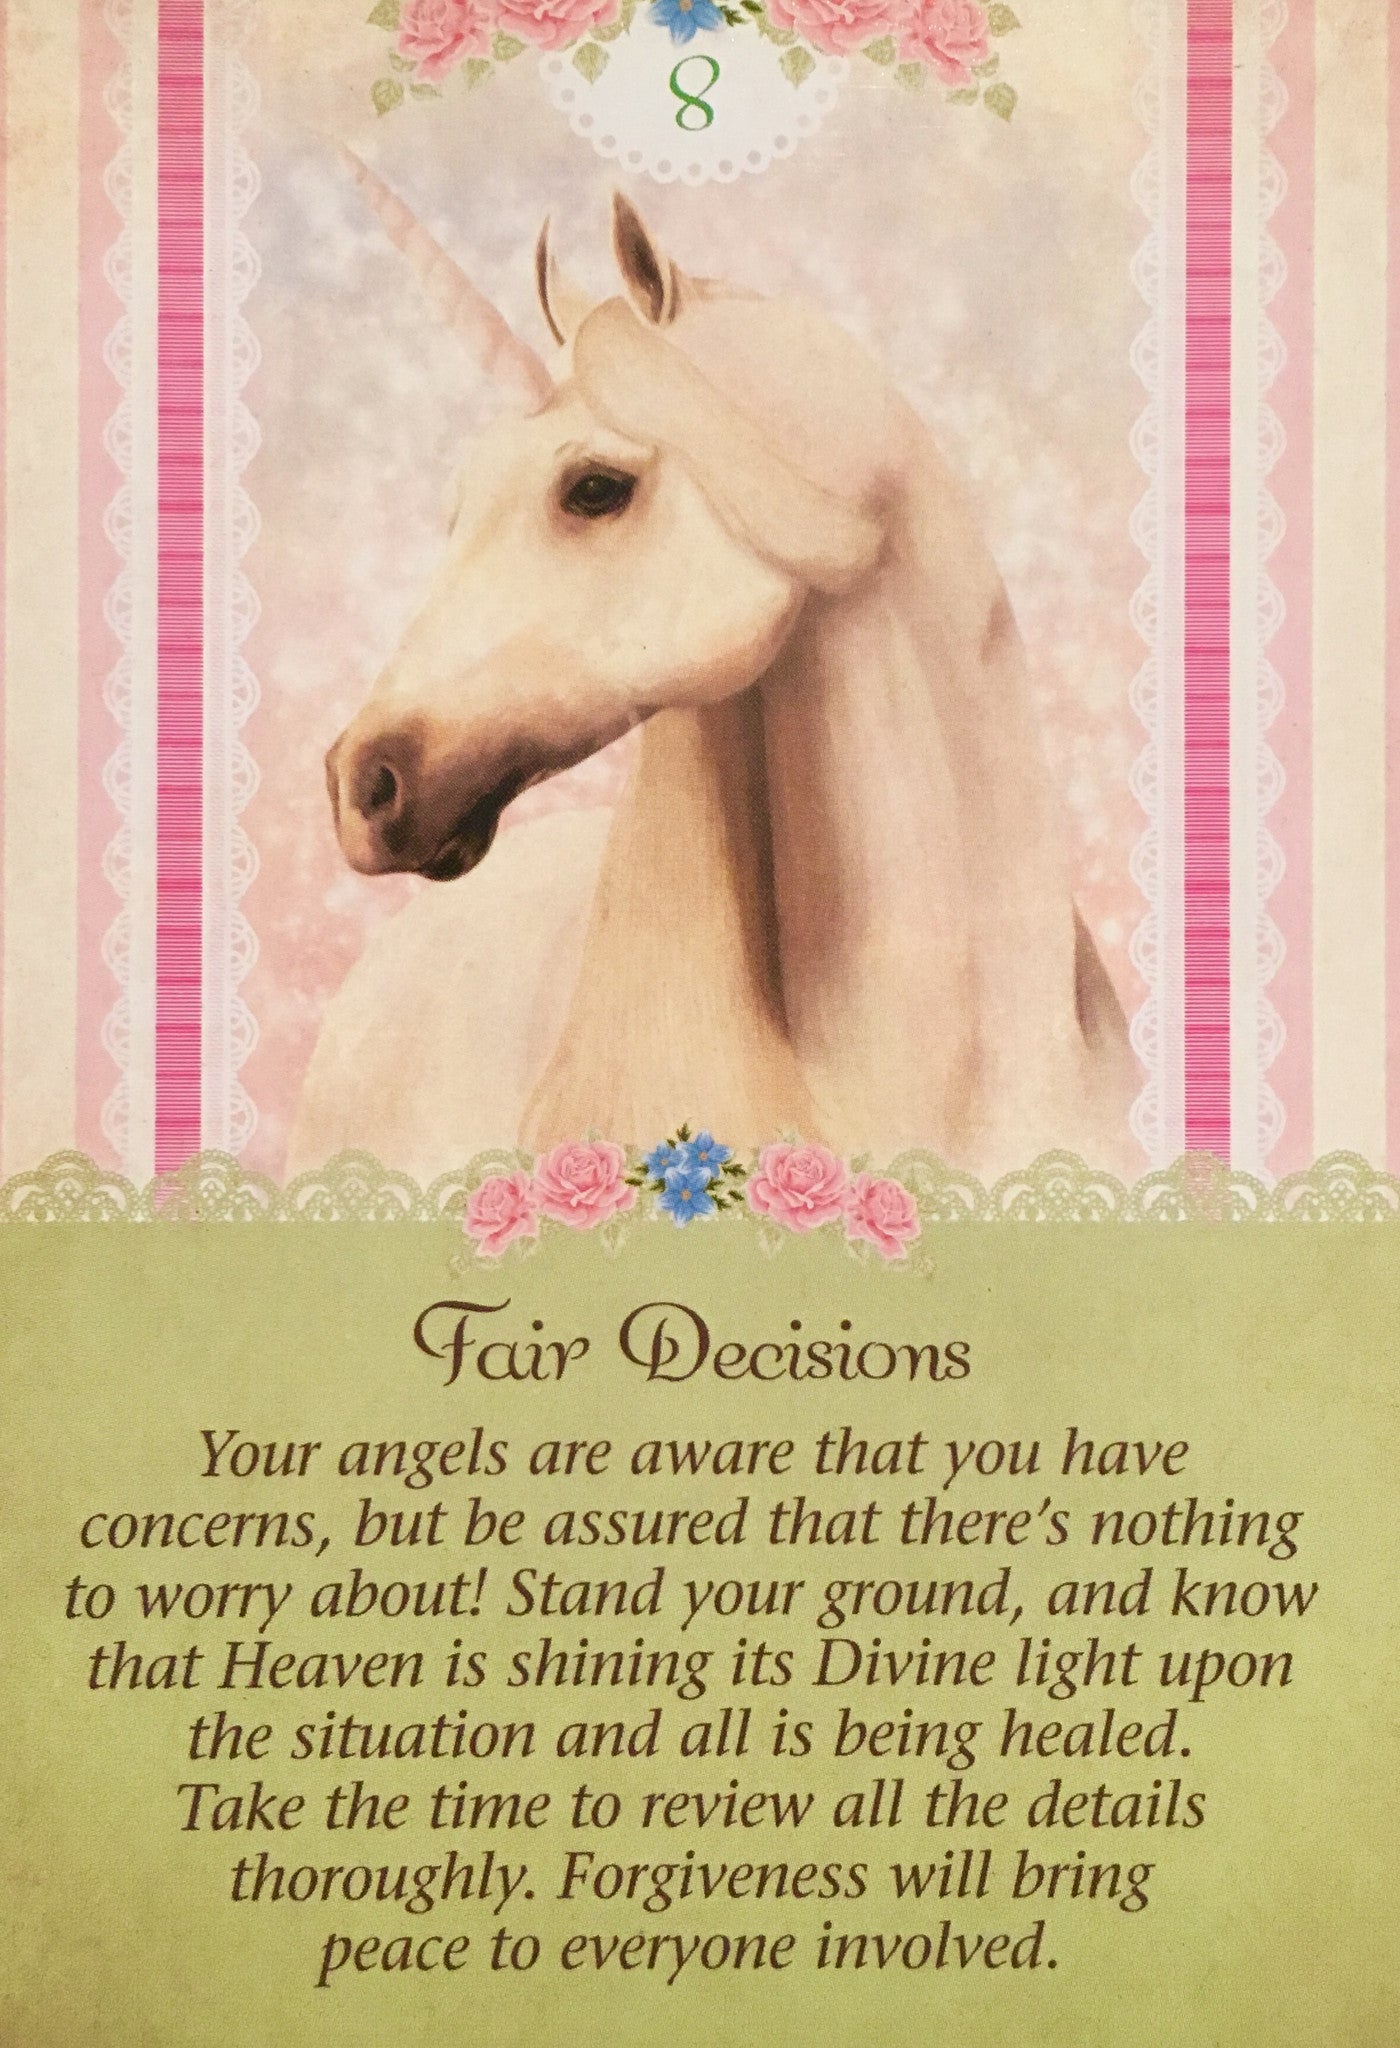 Fair Decisions: “Your angels are aware that you have concerns, but be assured that there is nothing to worry about!